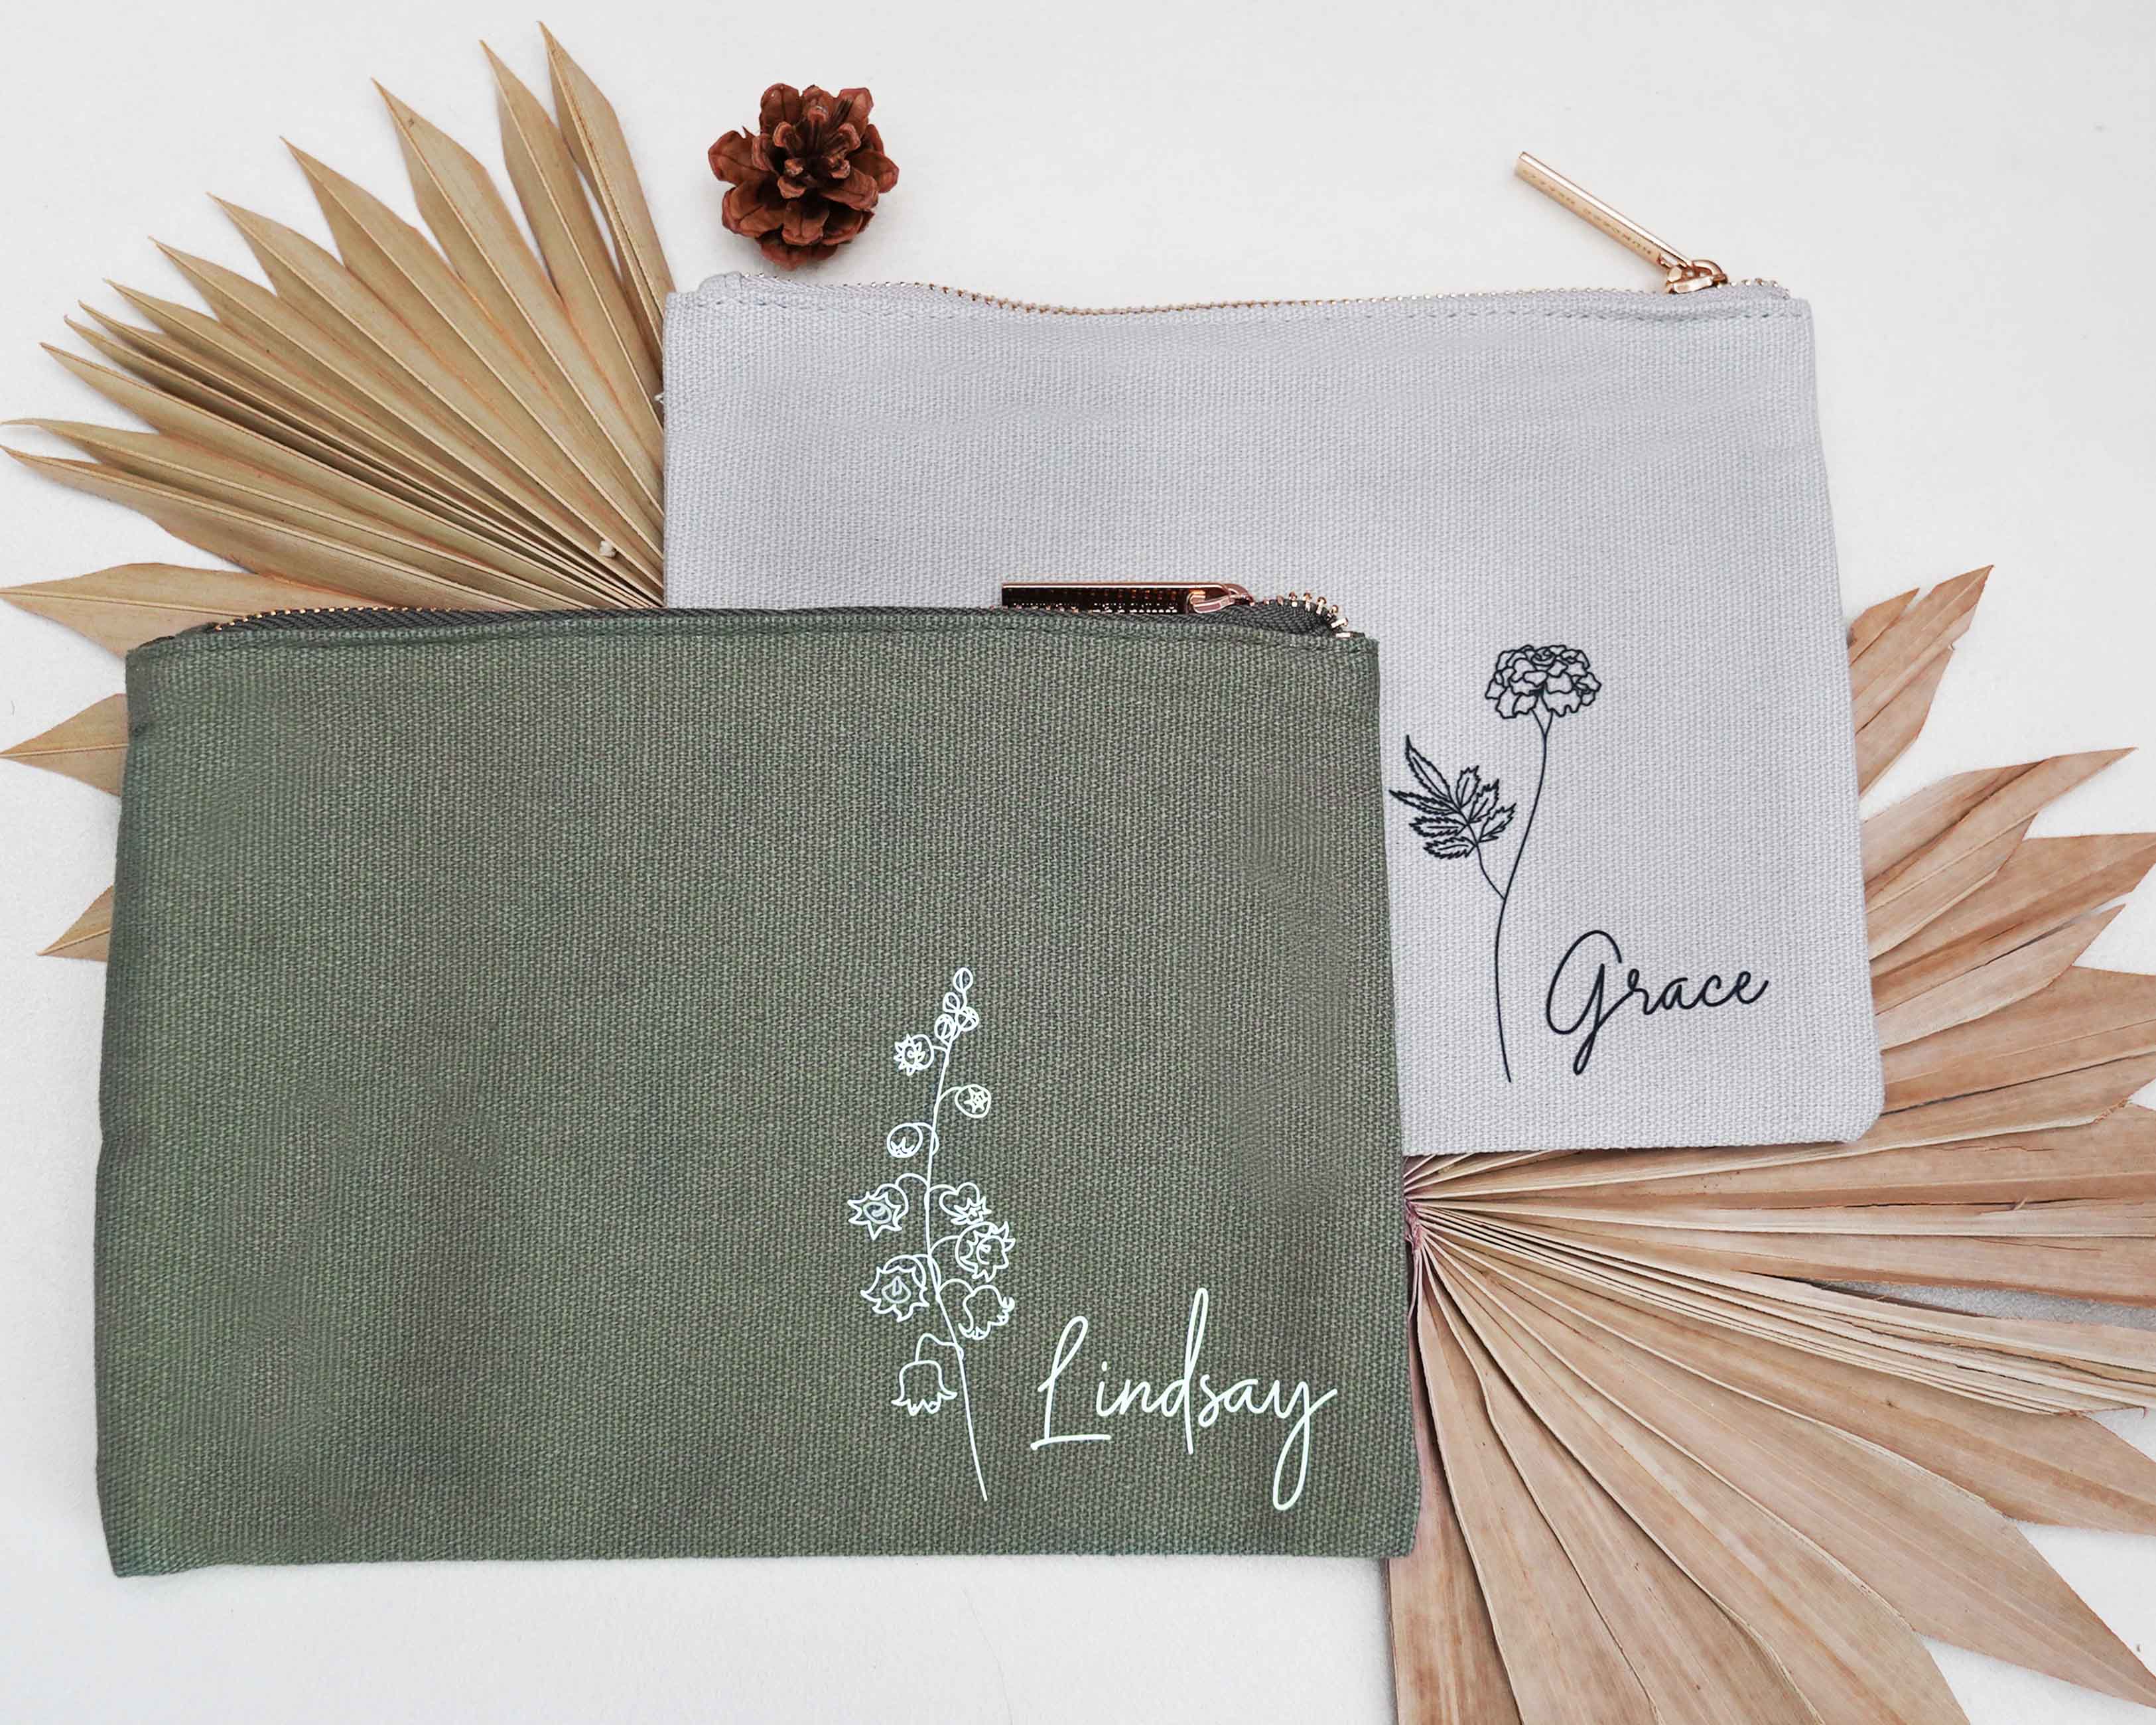 Gray and Sage Personalized Cosmetic Bags with birth flower image and name.